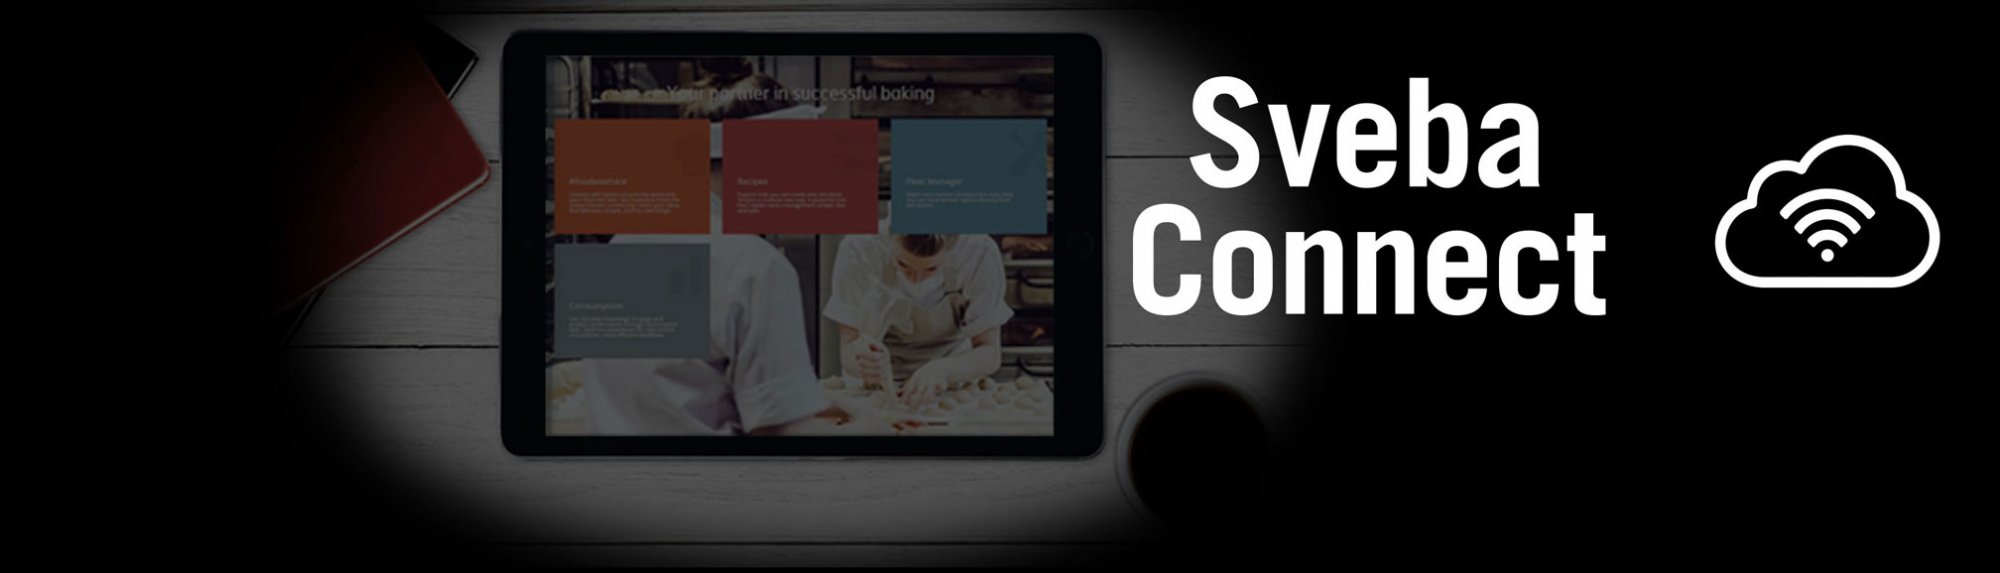 Connect your ovens to the cloud download recipes statistics information Sveba Connect